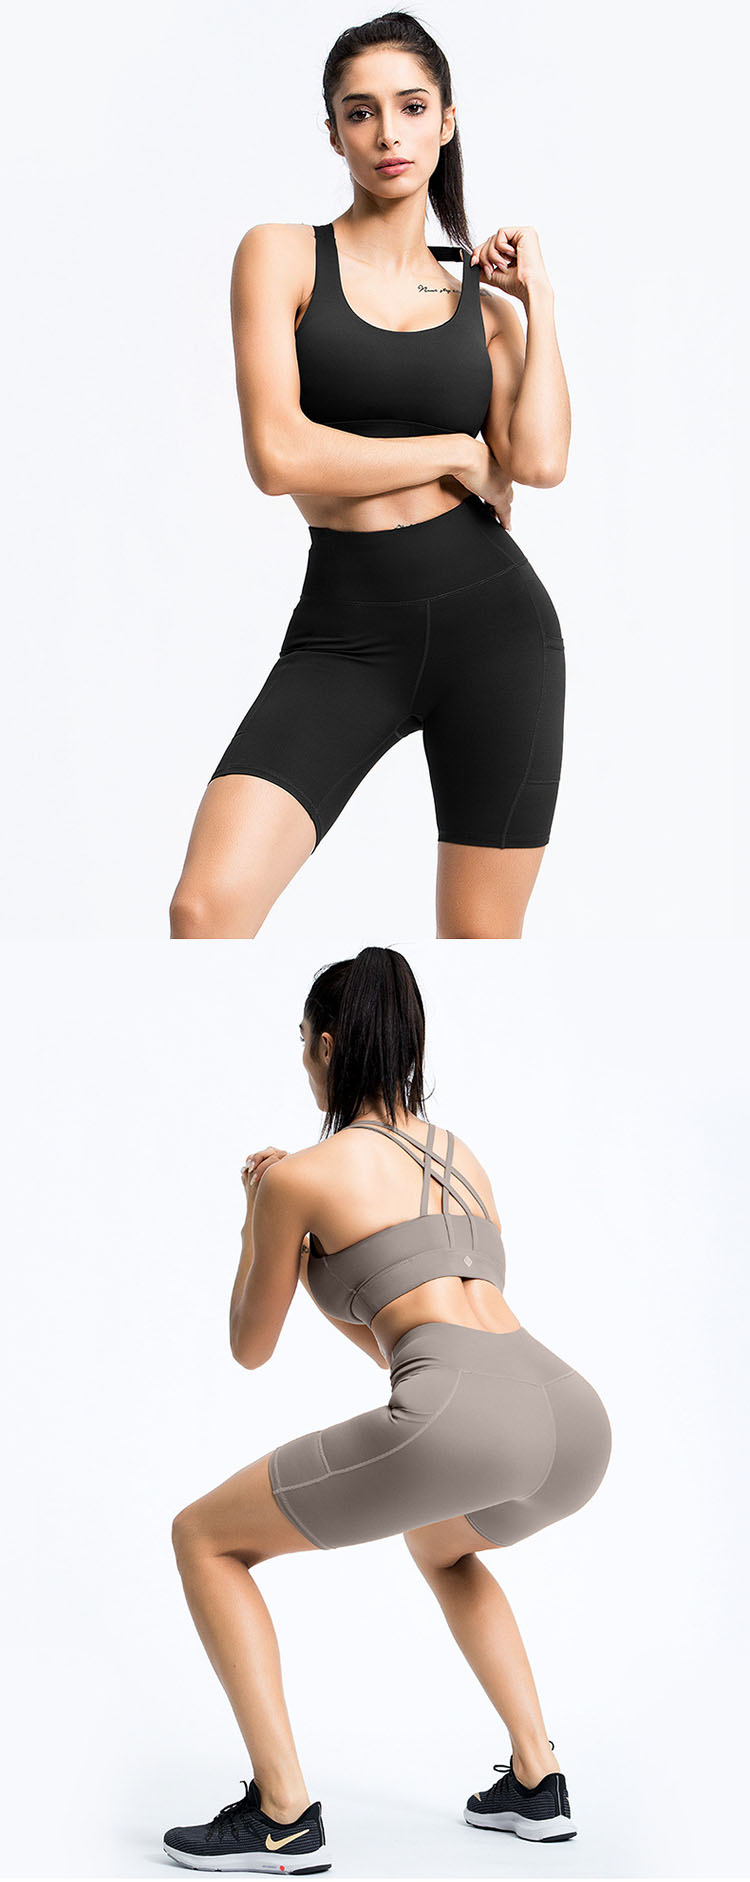 A pair of comfortable yoga pants must be ergonomic in the application of structural division